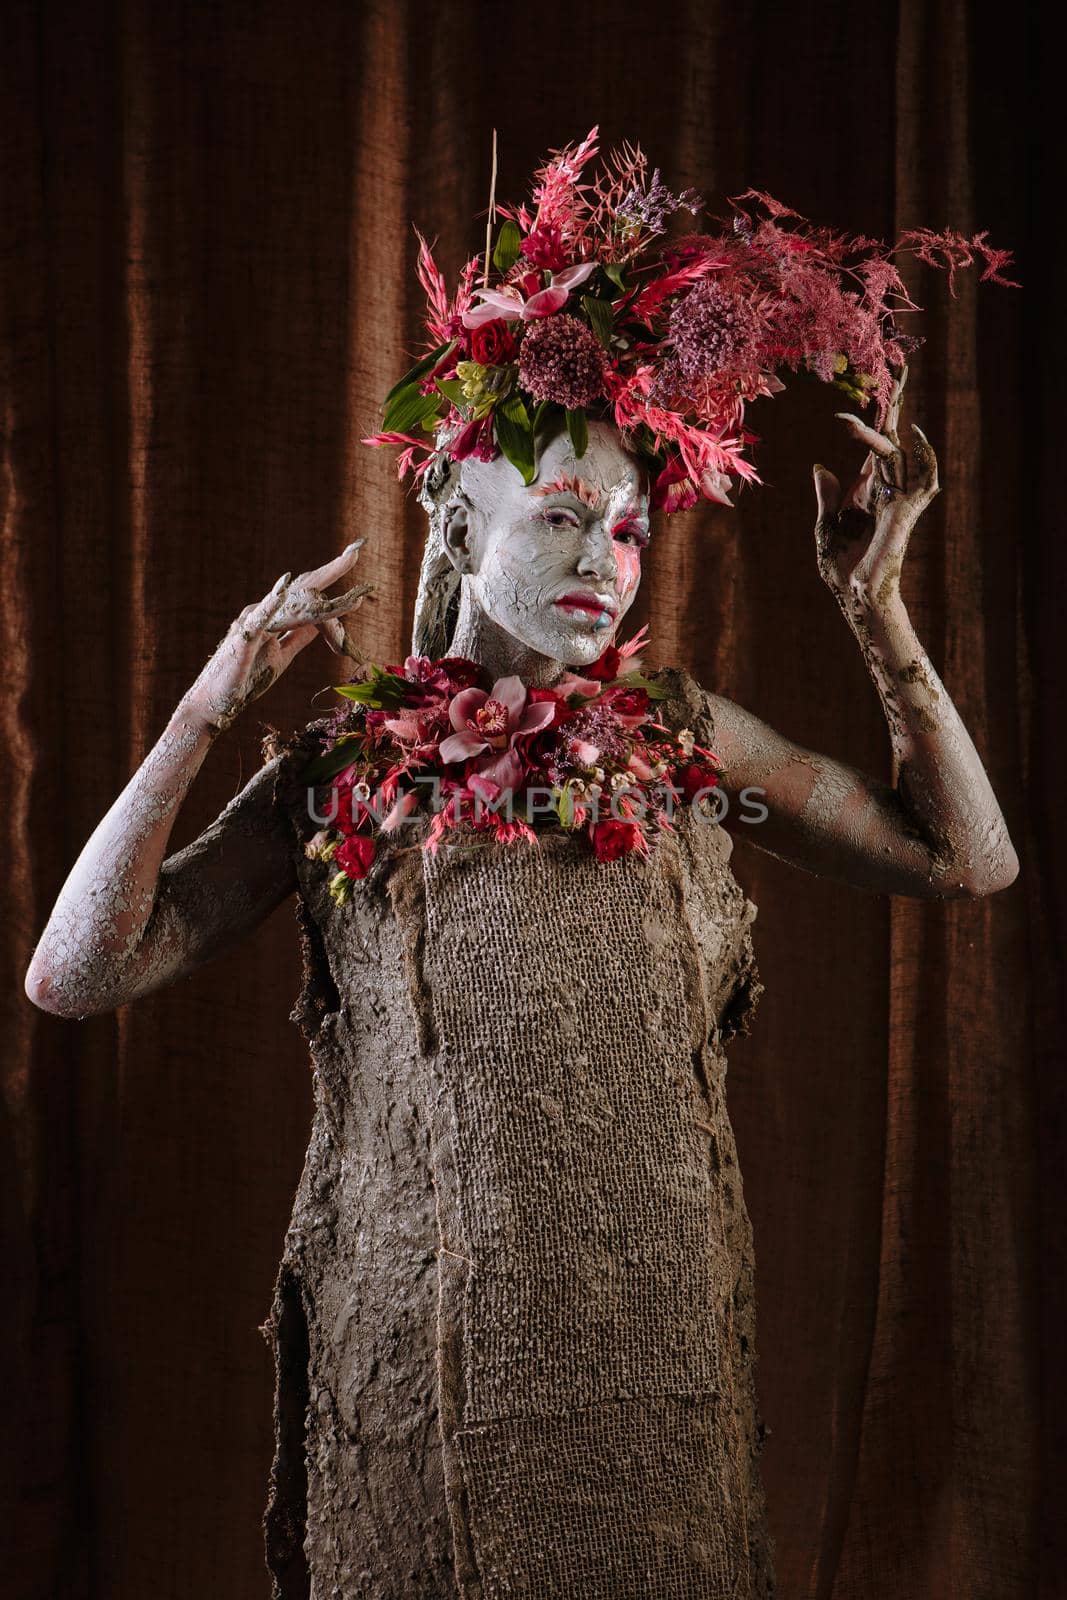 A girl smeared with clay in a cemented dress. The model has a headdress made of flowers. by deandy